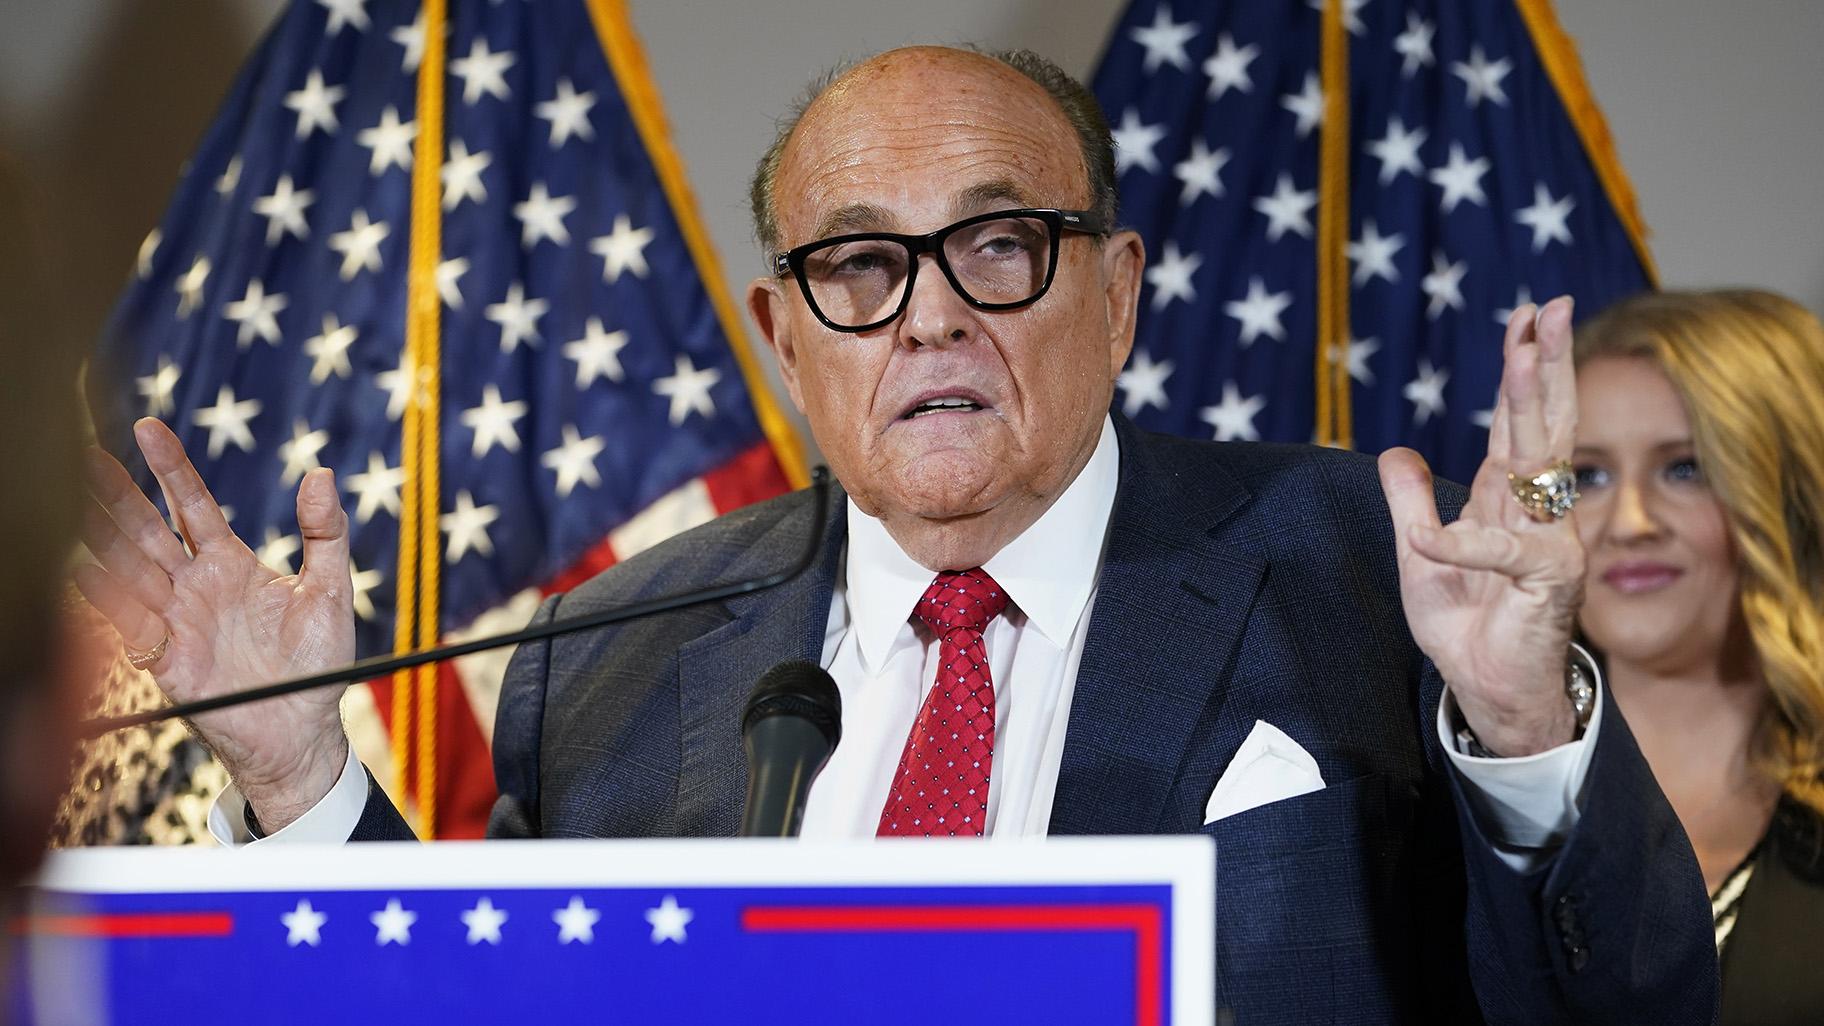 In this Nov. 19, 2020, file photo, former New York Mayor Rudy Giuliani, a lawyer for President Donald Trump, speaks during a news conference at the Republican National Committee headquarters, in Washington. (AP Photo / Jacquelyn Martin, File)